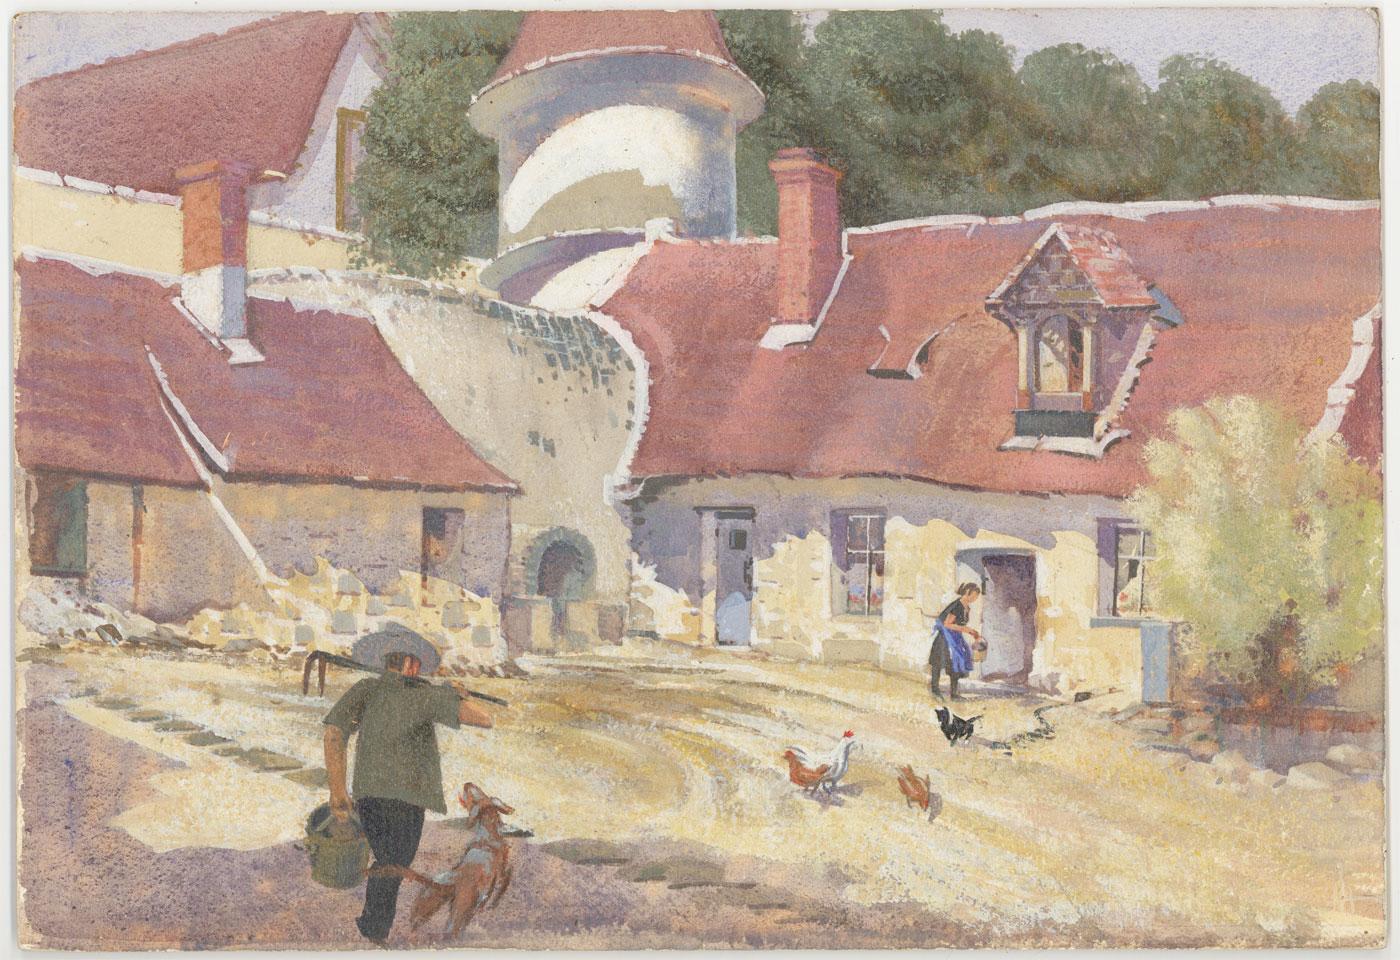 A fine gouache study of a French farmyard with watercolour wash by Laurence H.F. Irving. Here the artist has captured an idyllic scene with a farmer returning from a day's work with his dog beside him. A young woman can be seen feeding chickens